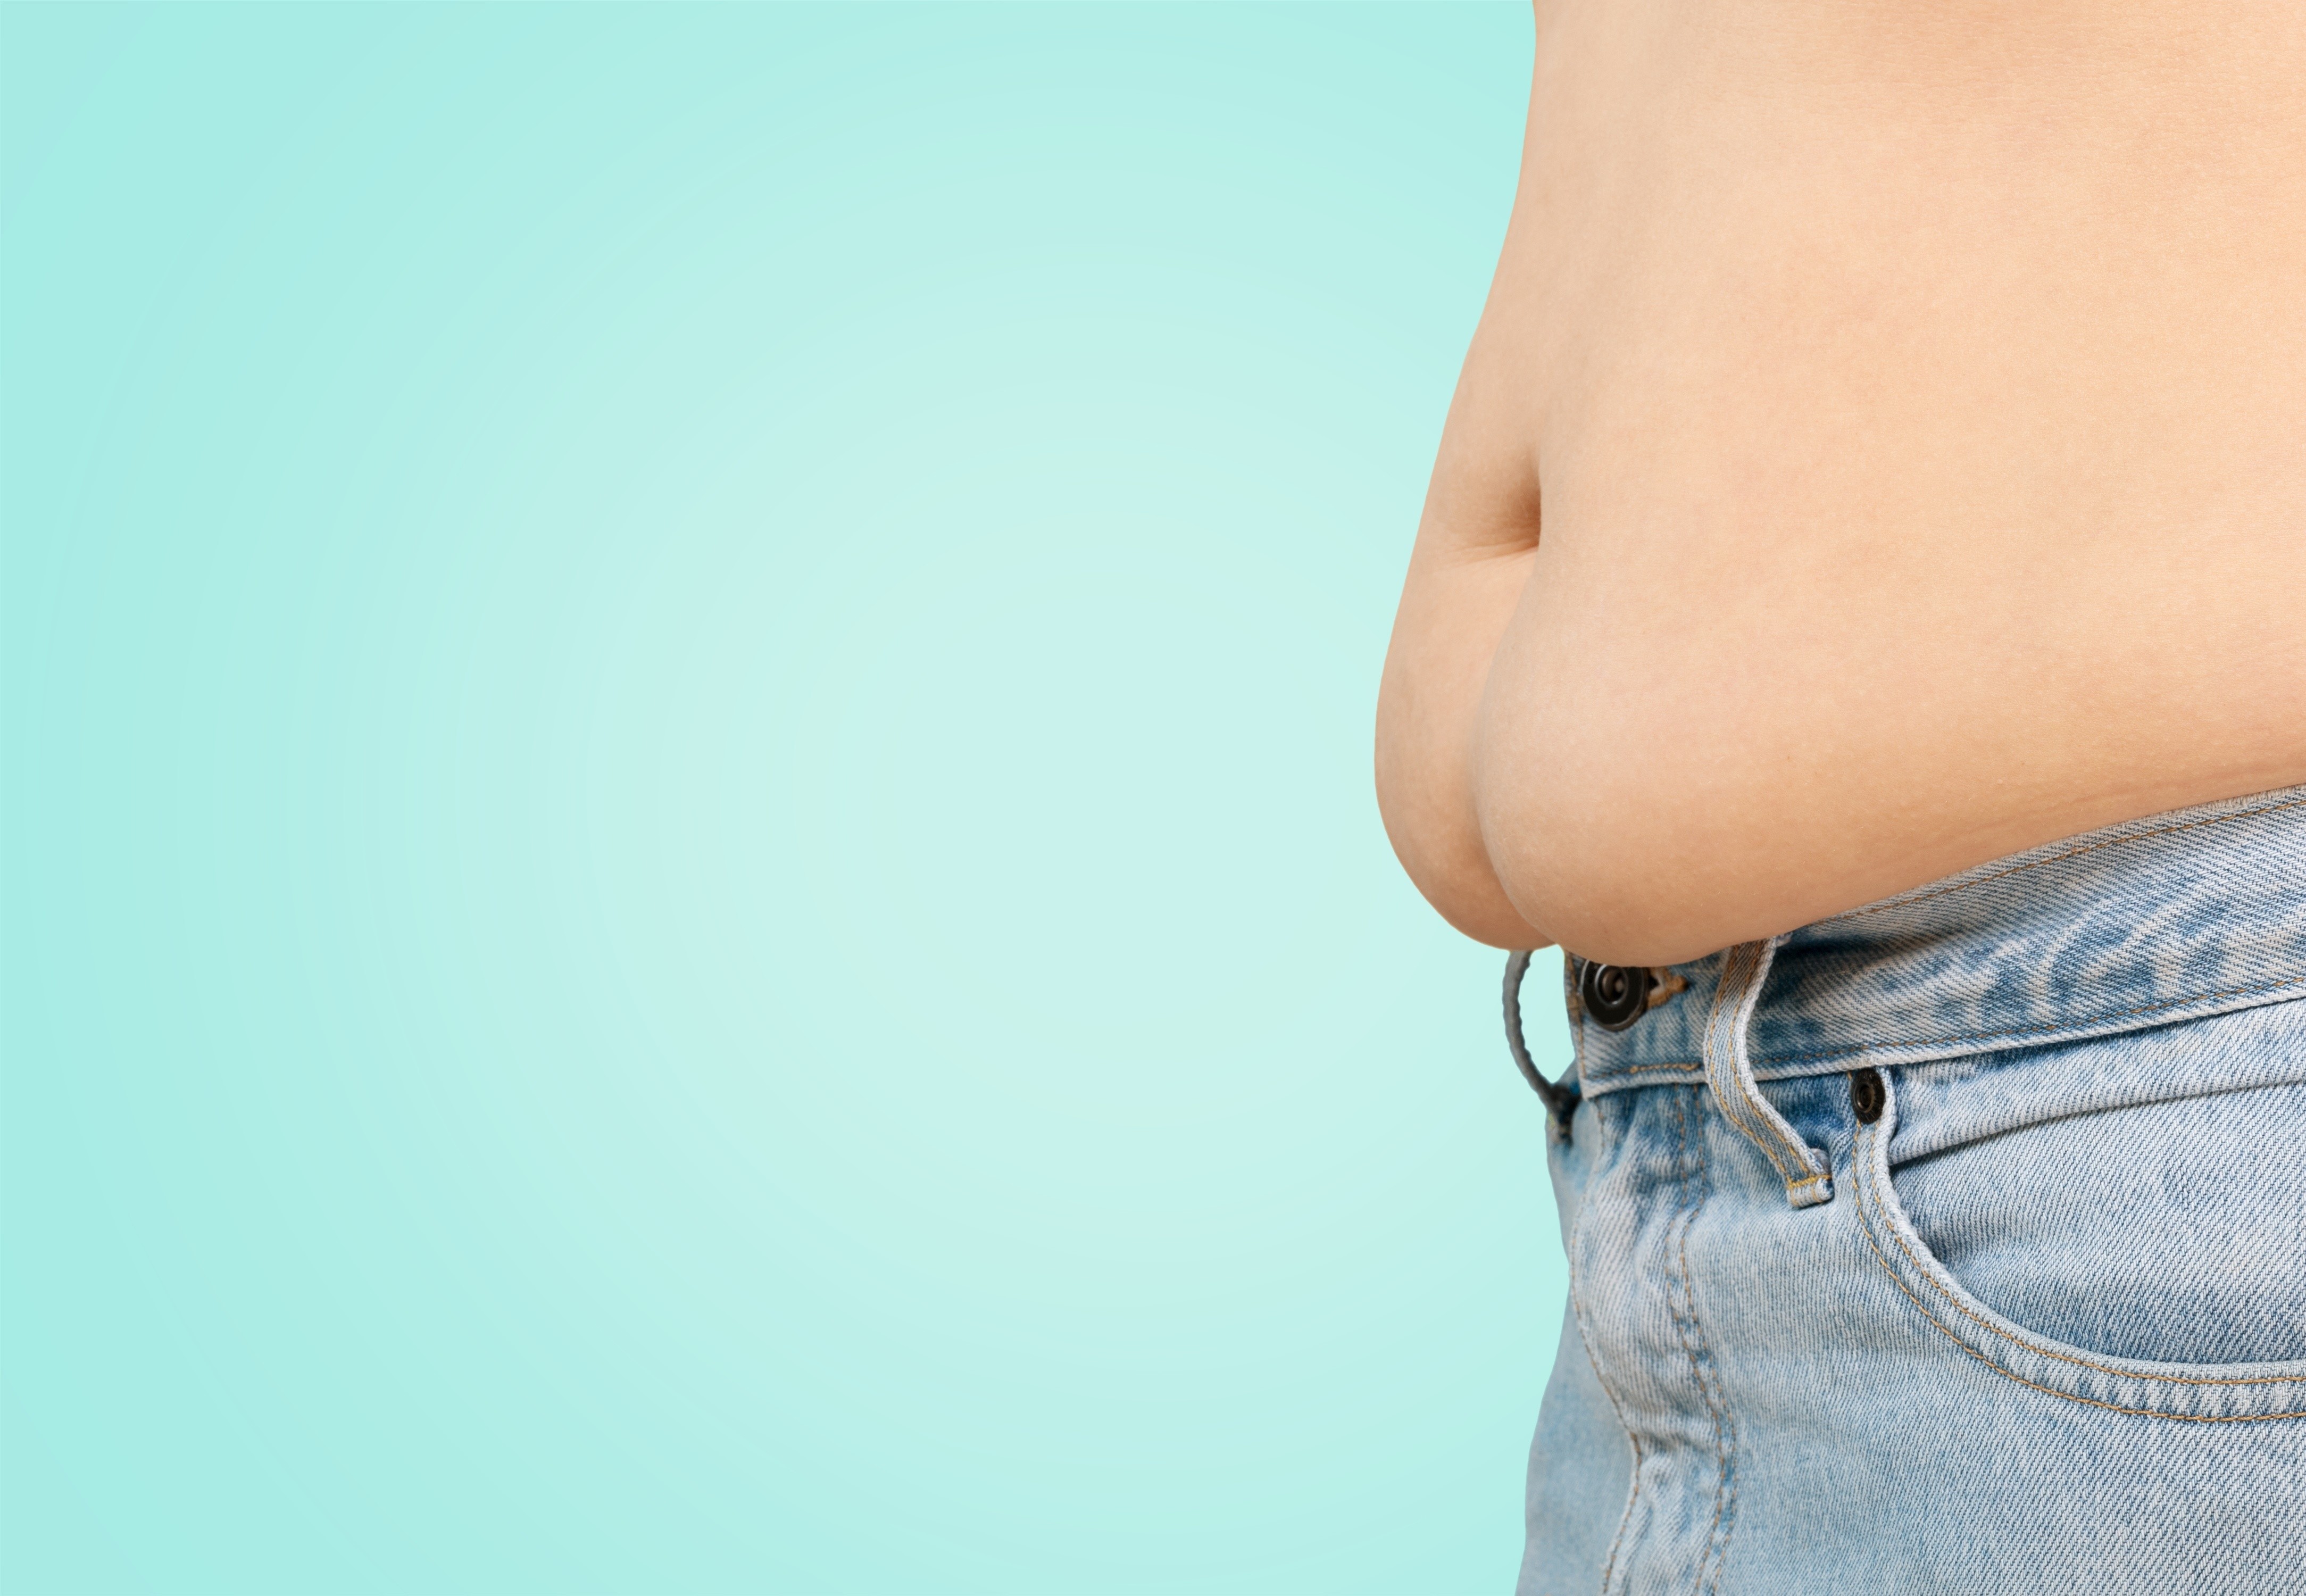 The 5 Most Requested Areas for Liposuction